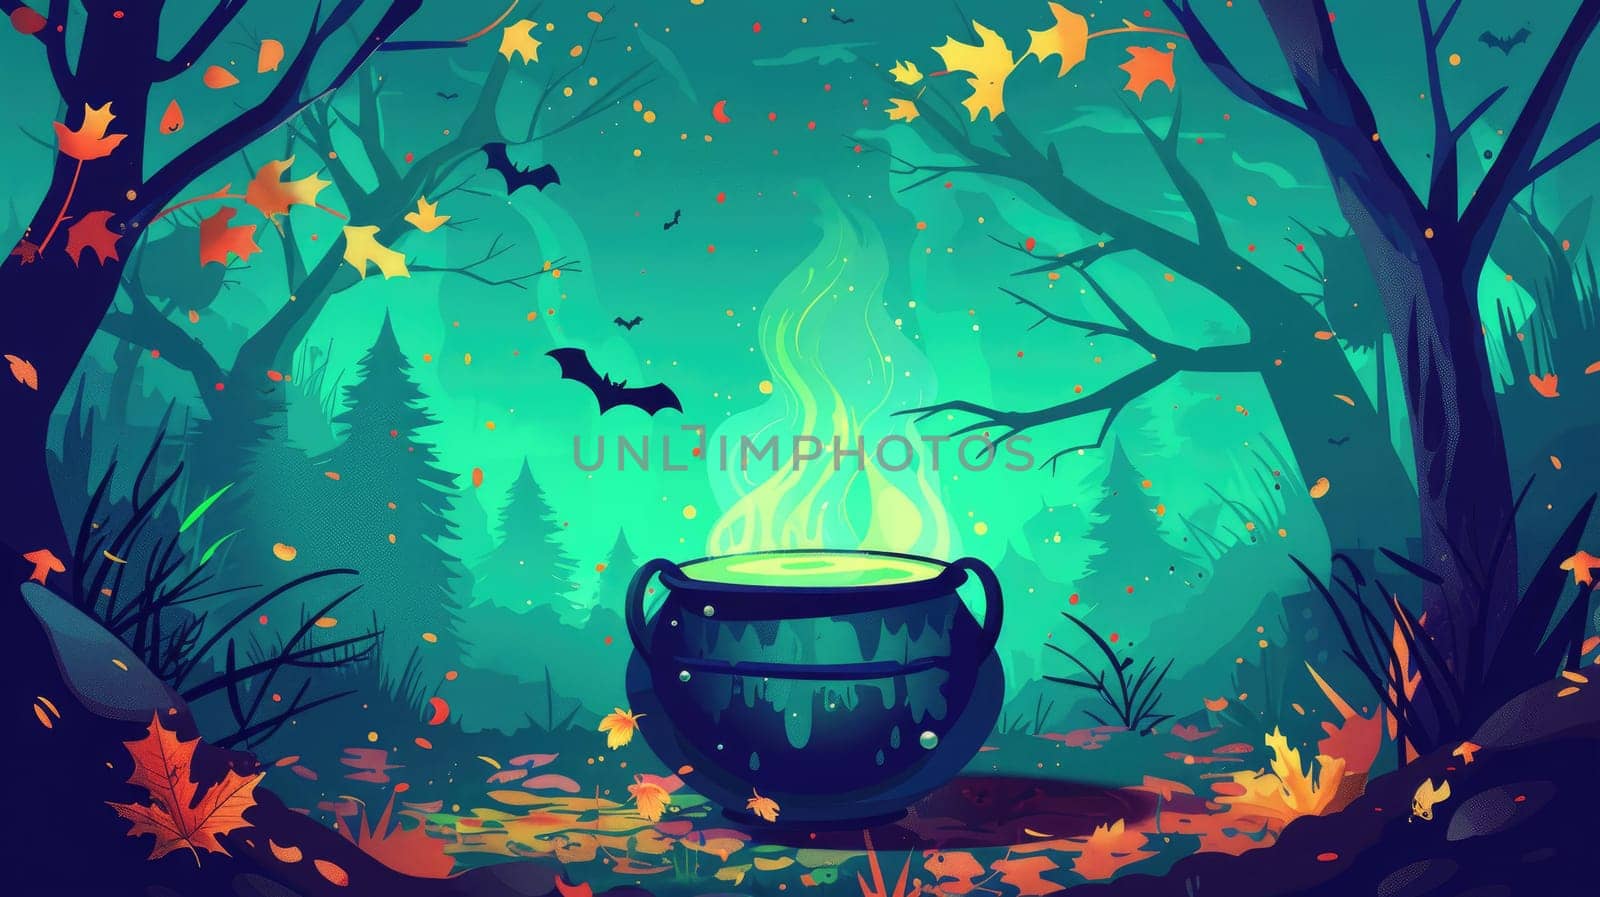 A green and blue forest with a large cauldron in the middle. The cauldron is filled with smoke and has a green glow. The scene is set in a dark and eerie atmosphere, with bats flying around